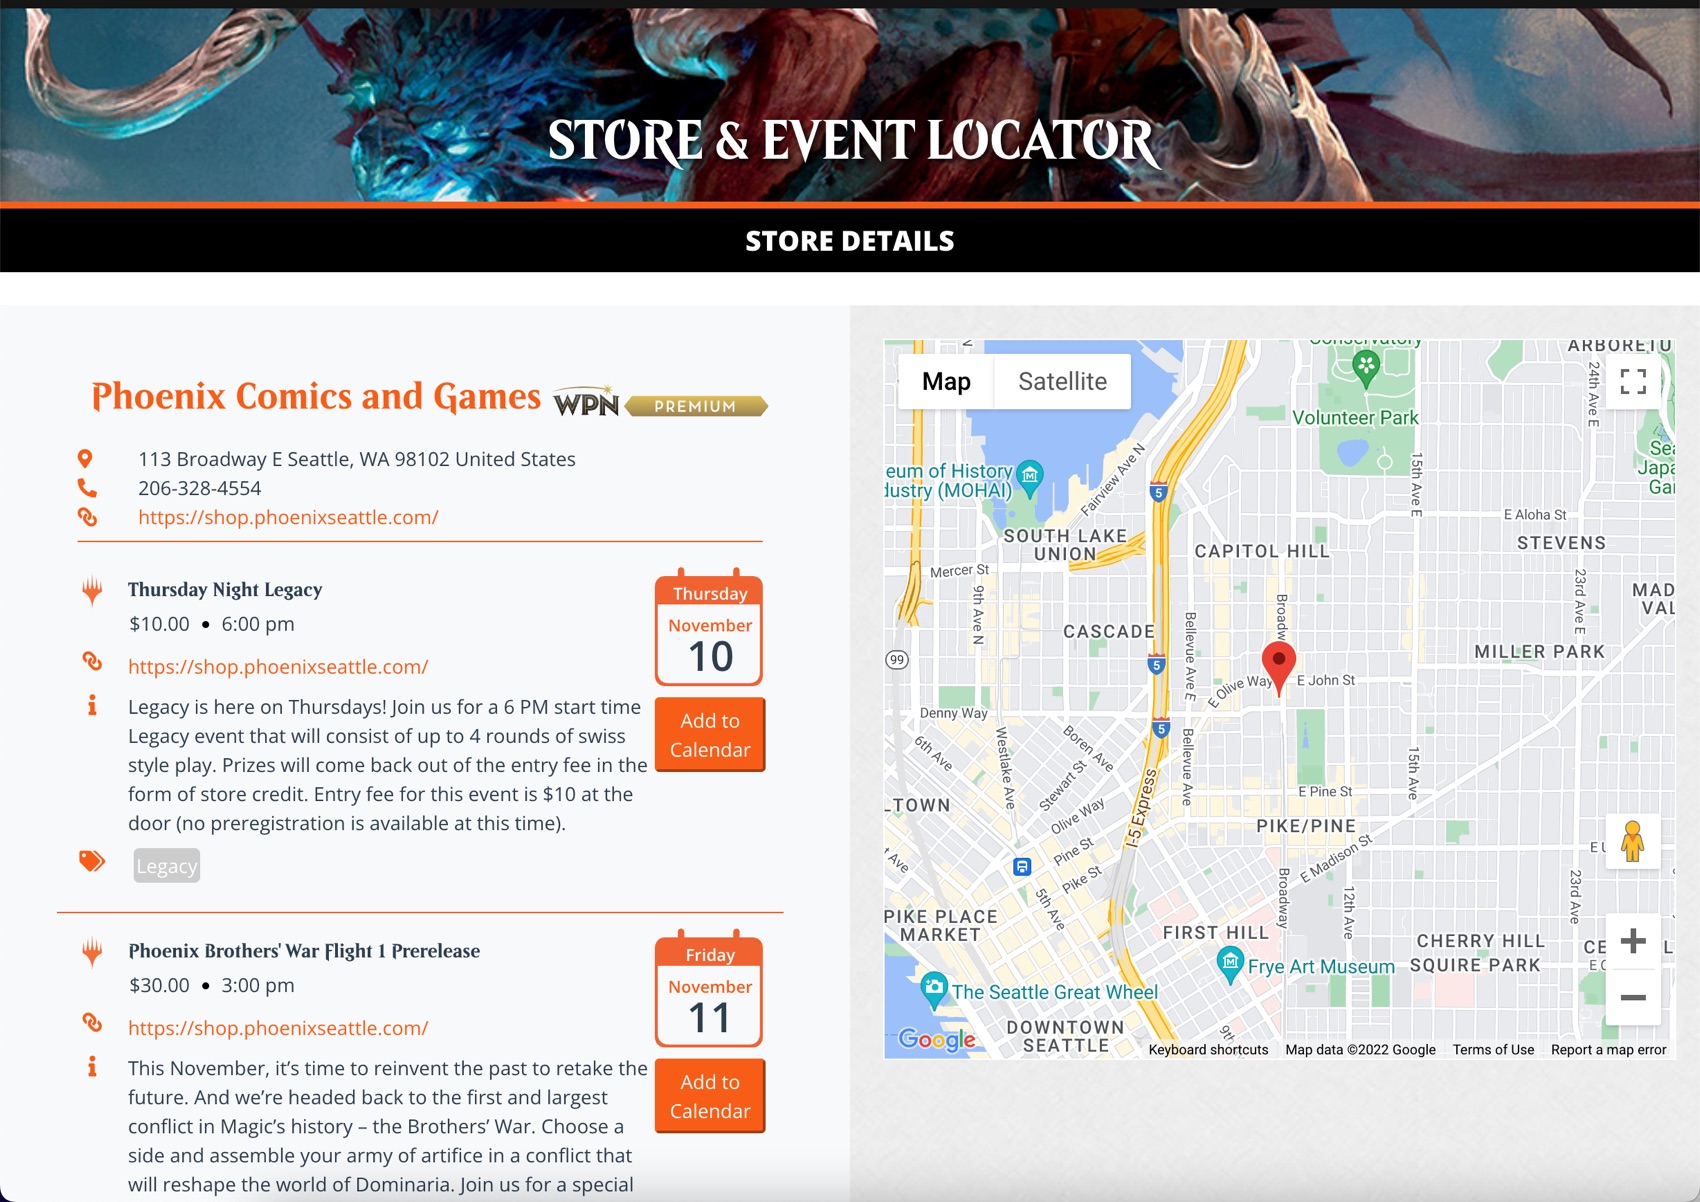 Locator desktop showing store details with name, address, phone number and buttons for View All Events and Store Website